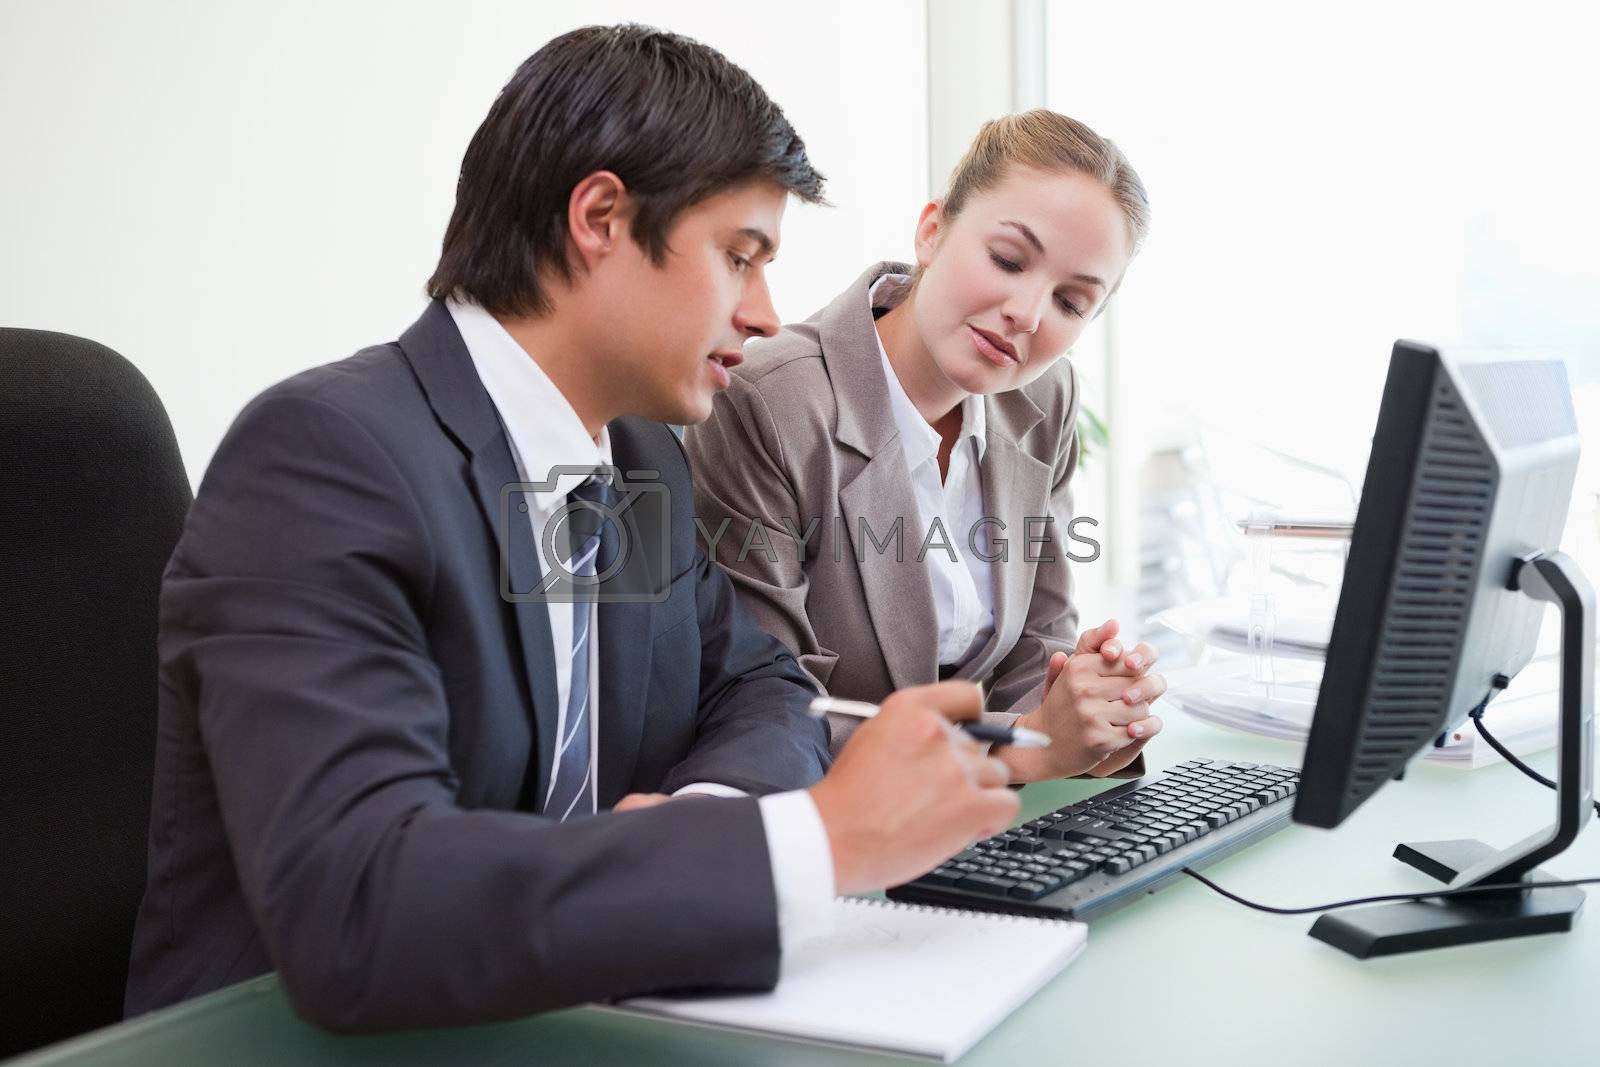 Royalty free image of Two executives in meeting at office by Wavebreakmedia